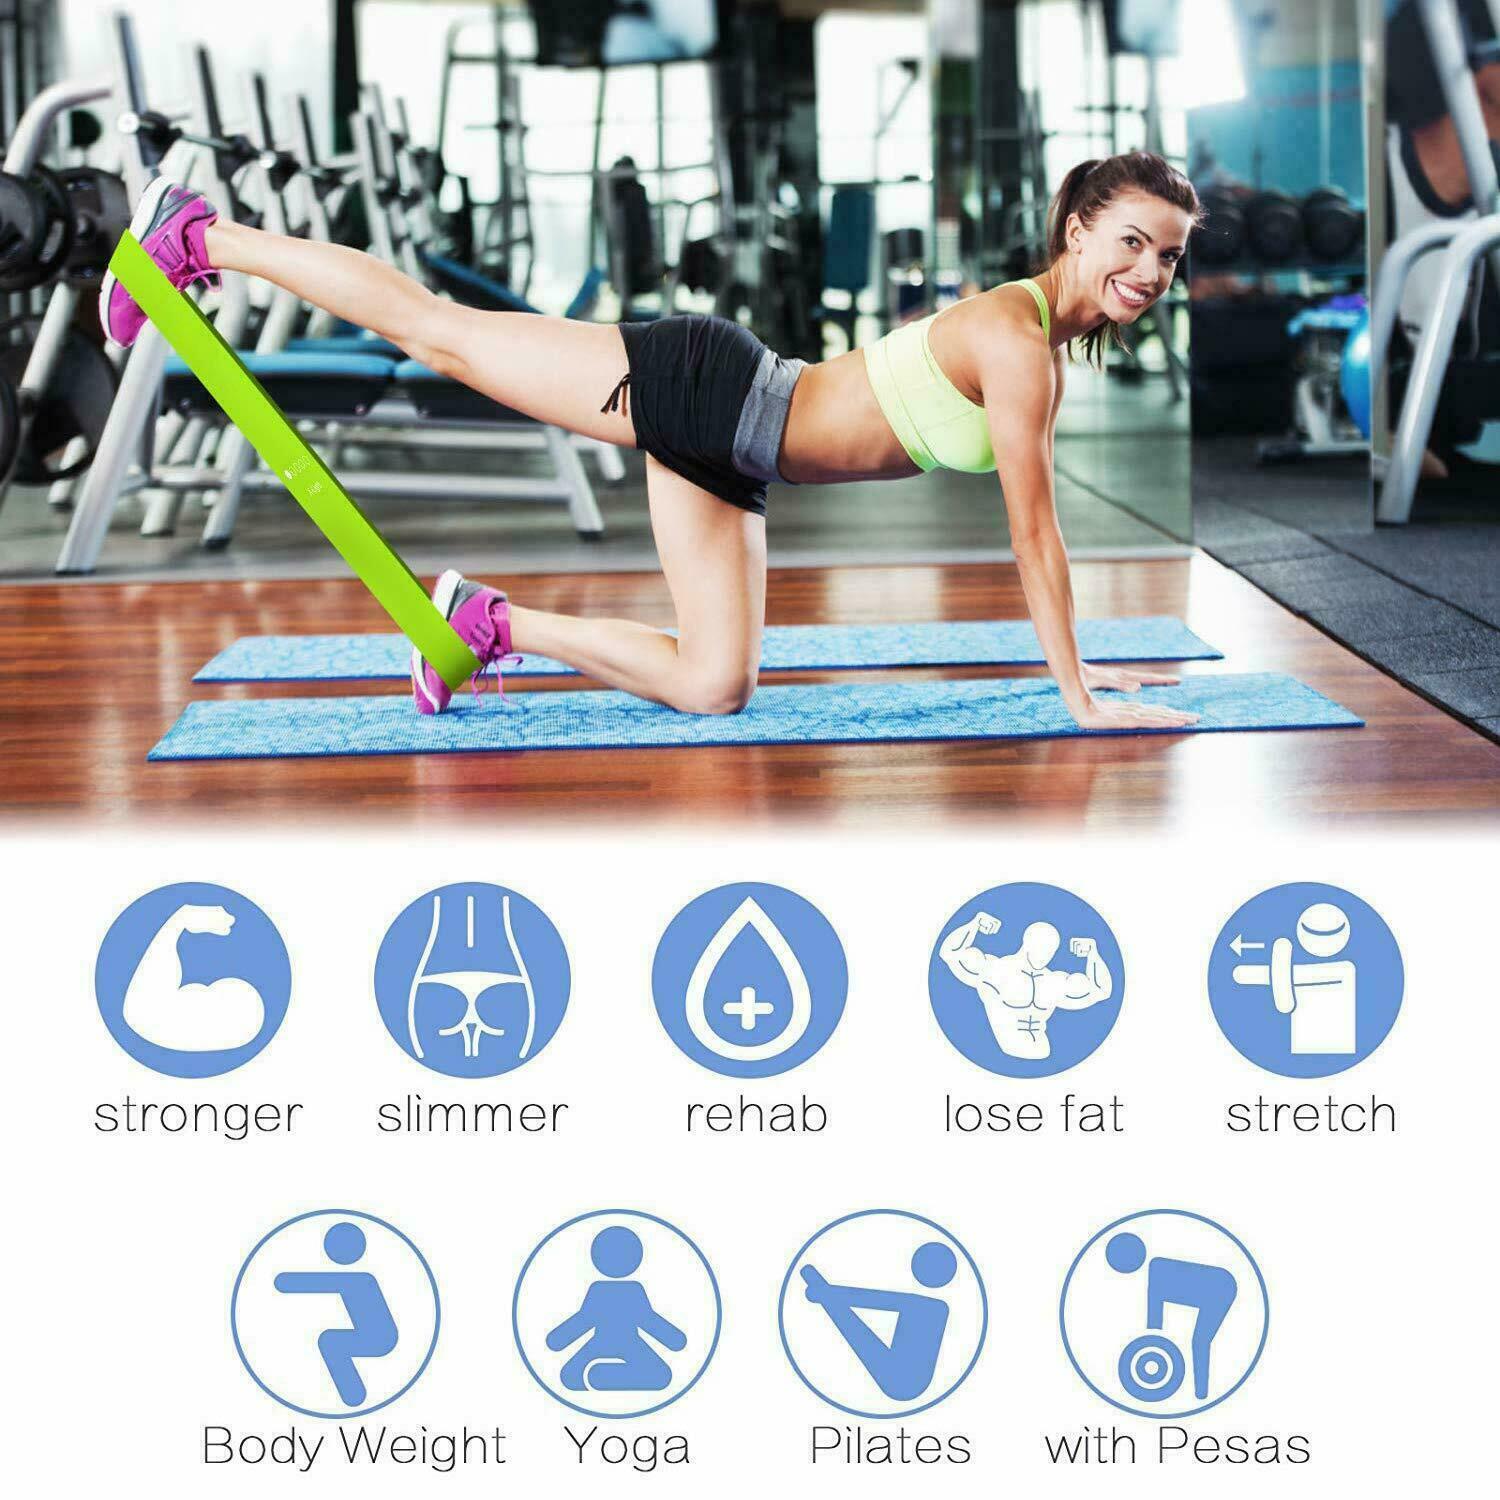 bodyweight yoga pilates stretch resistance bands